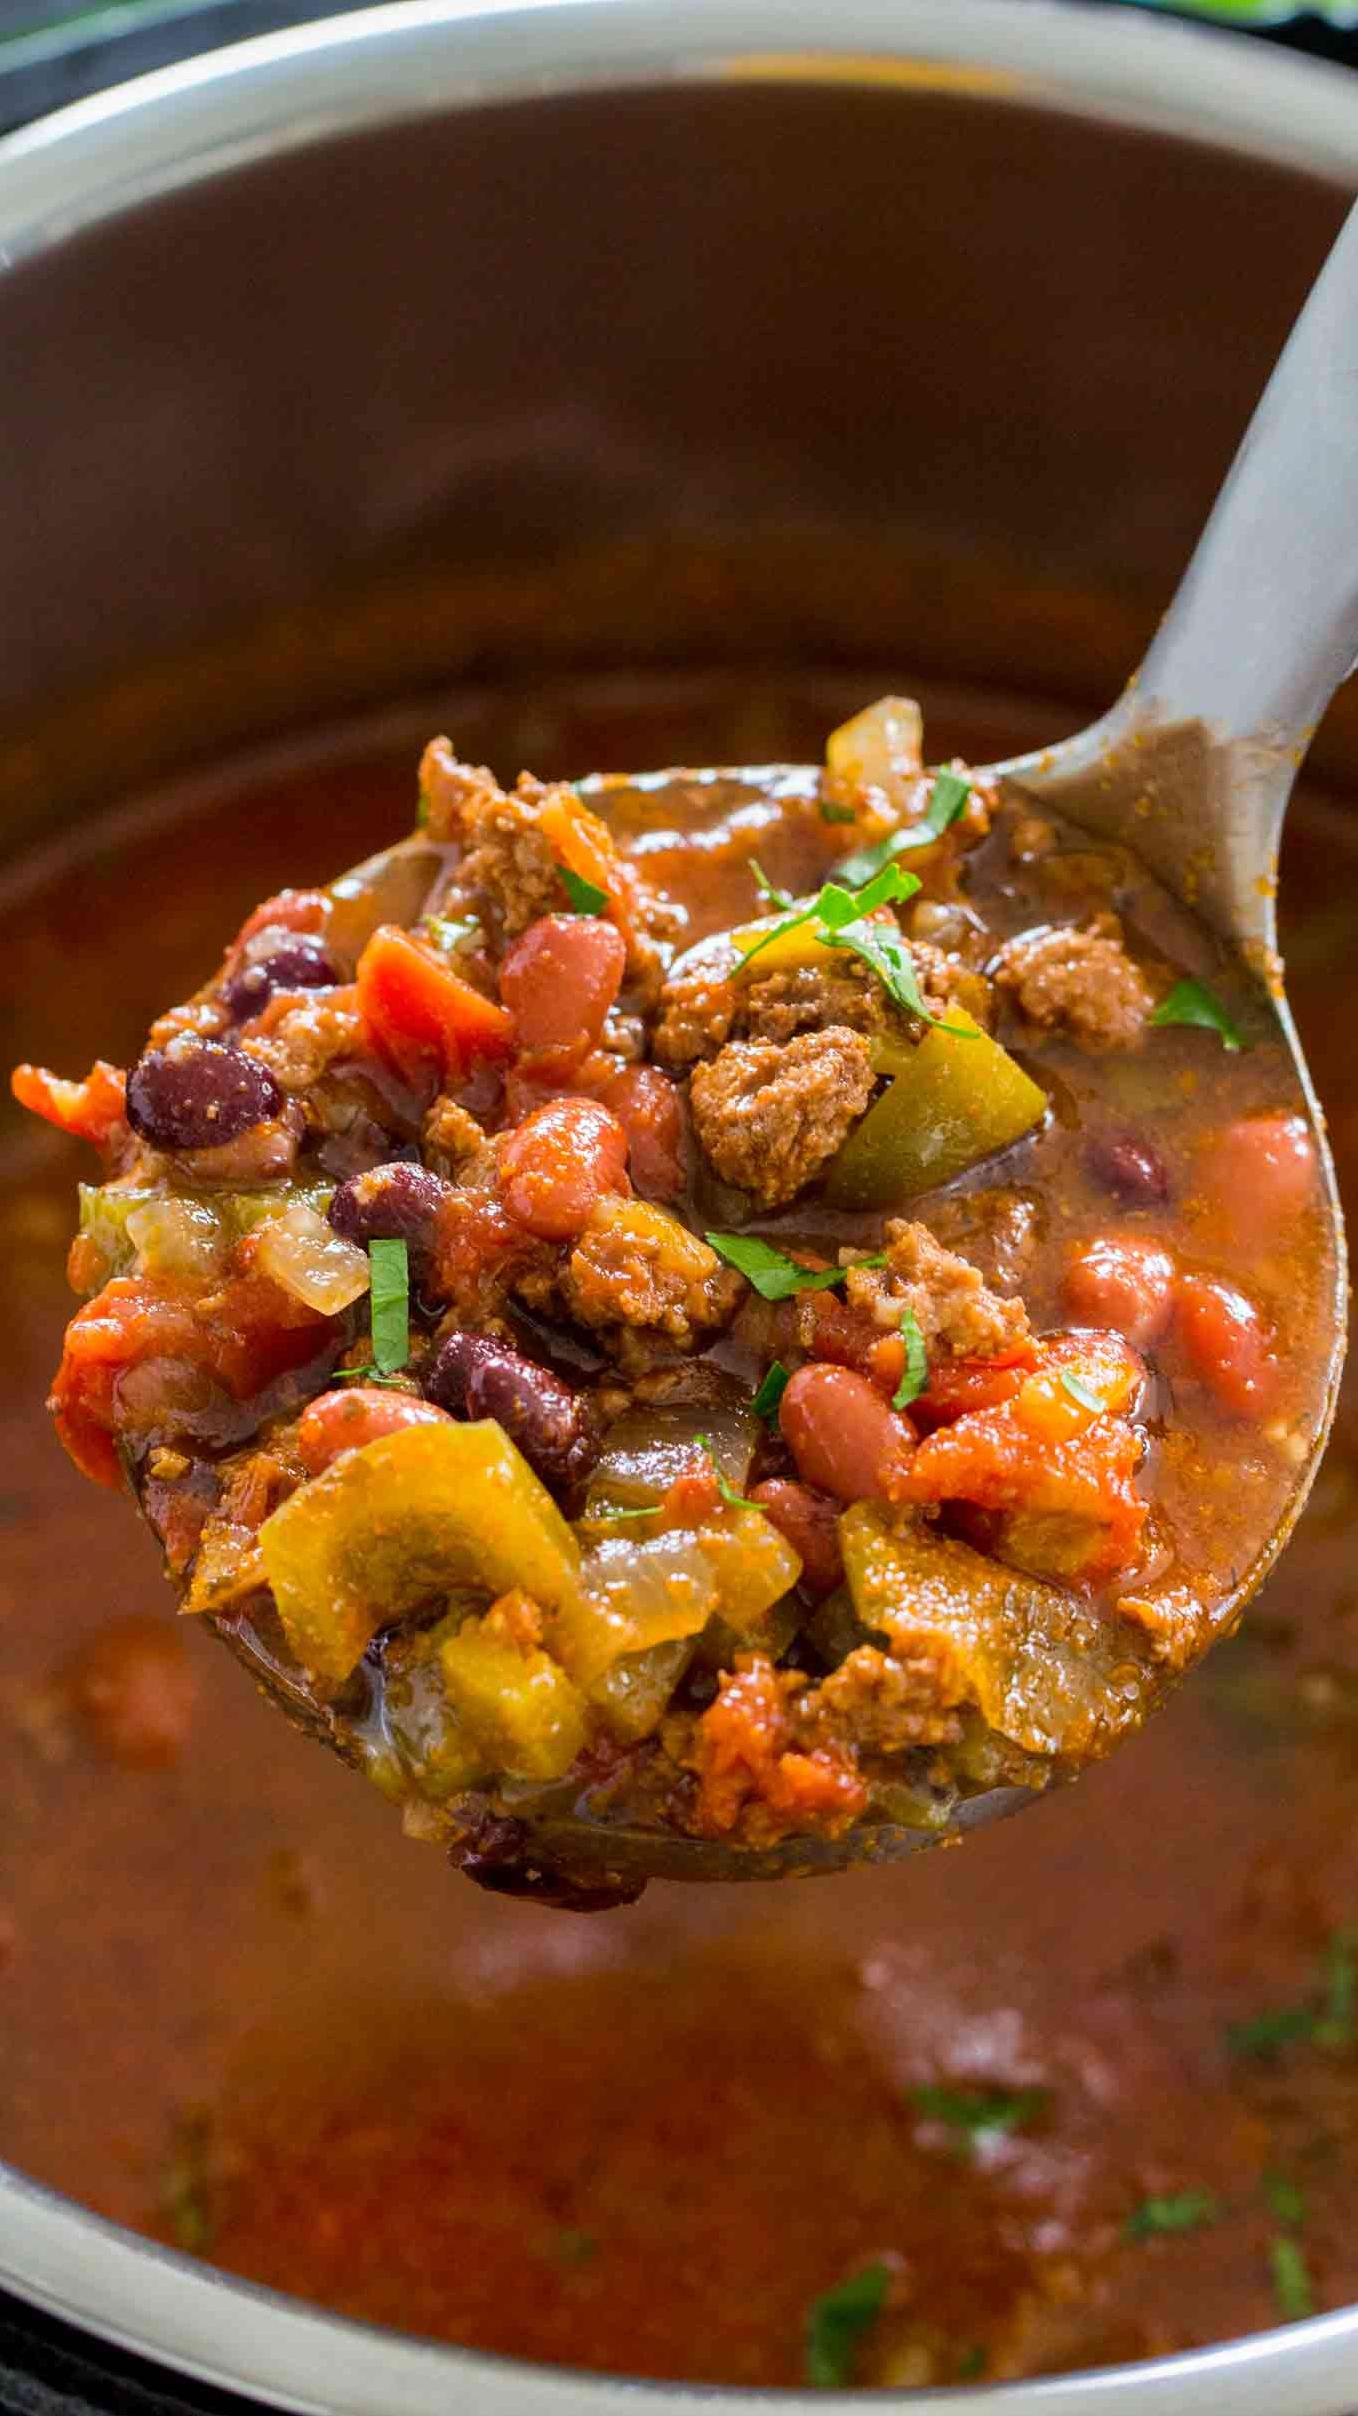  Looking for a quick and easy meal? Try this Instant Pot Taco Soup!